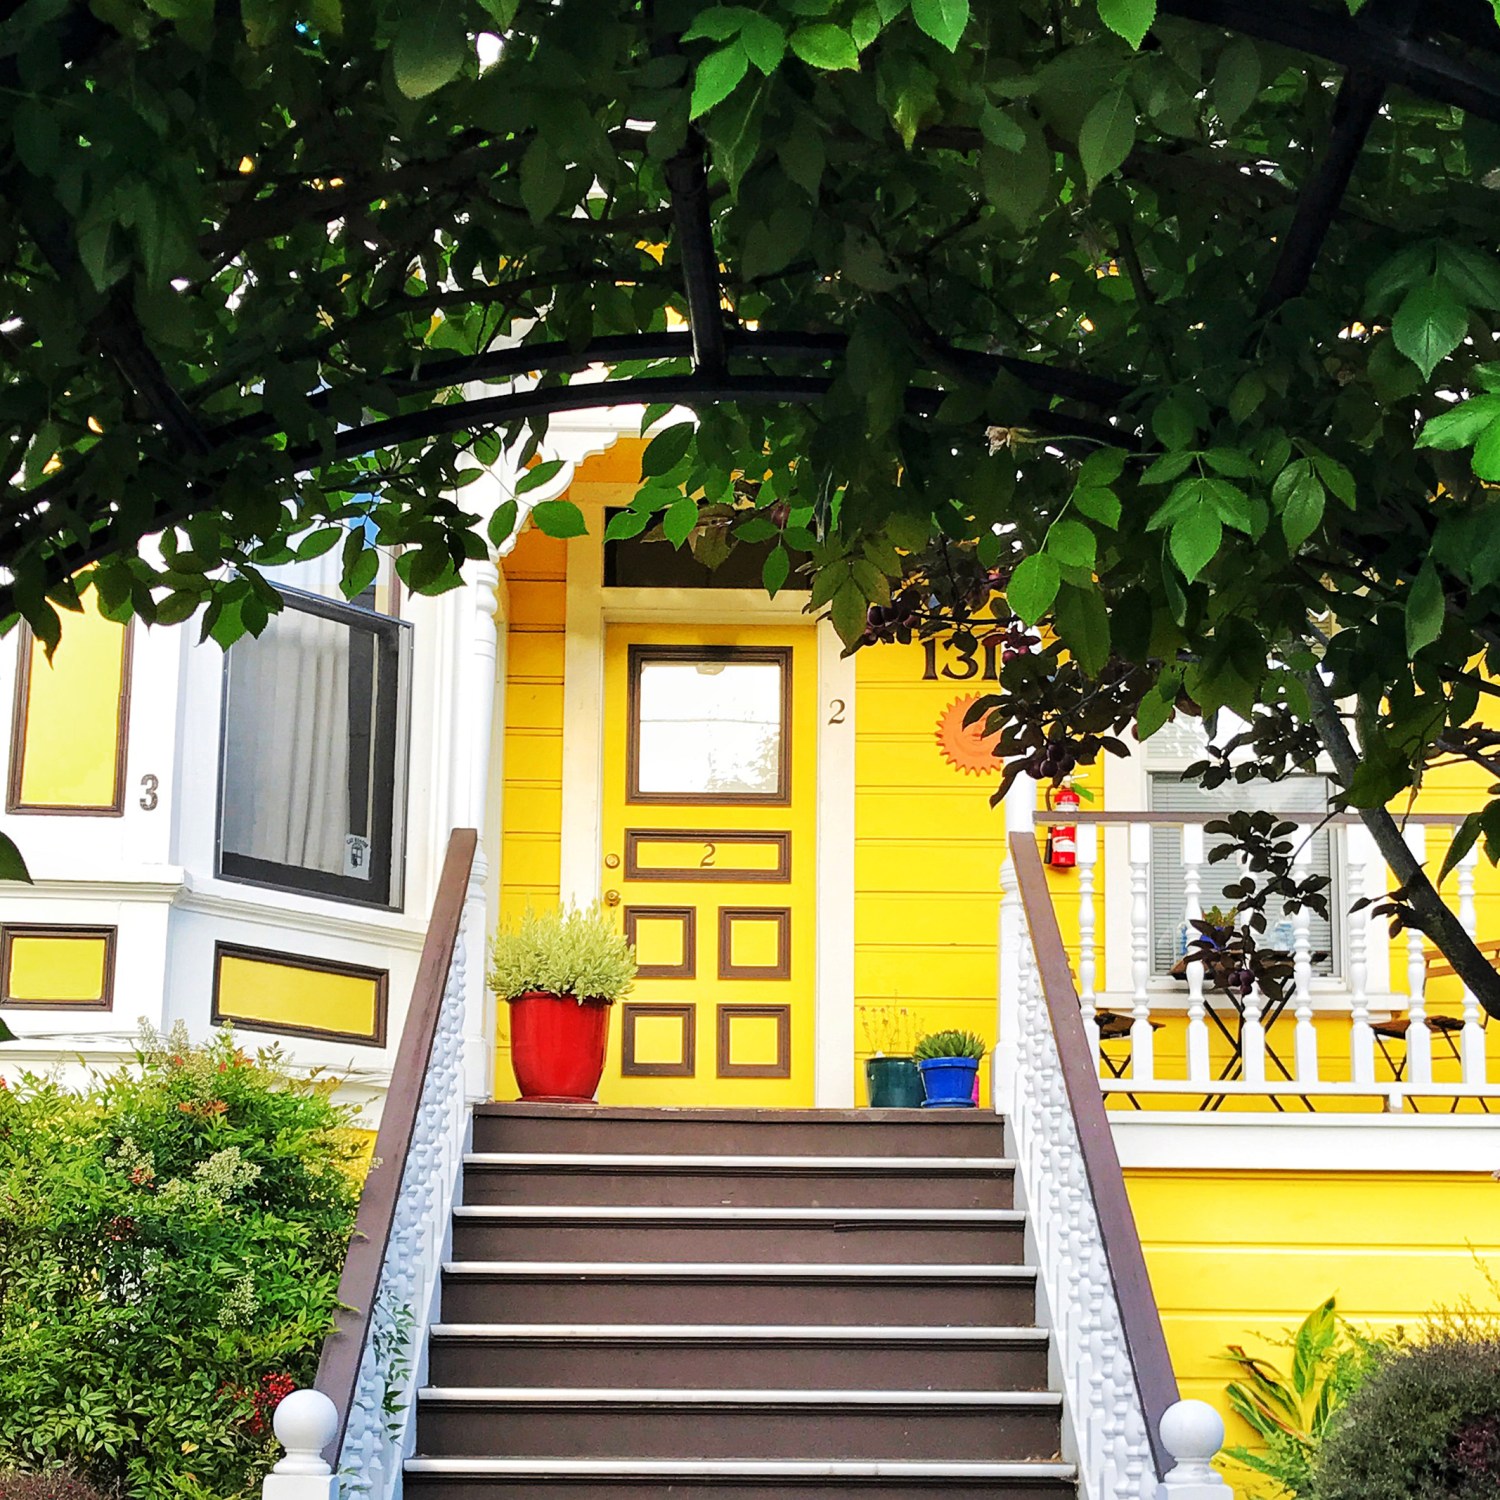 Foliage archway framing front steps and yellow door